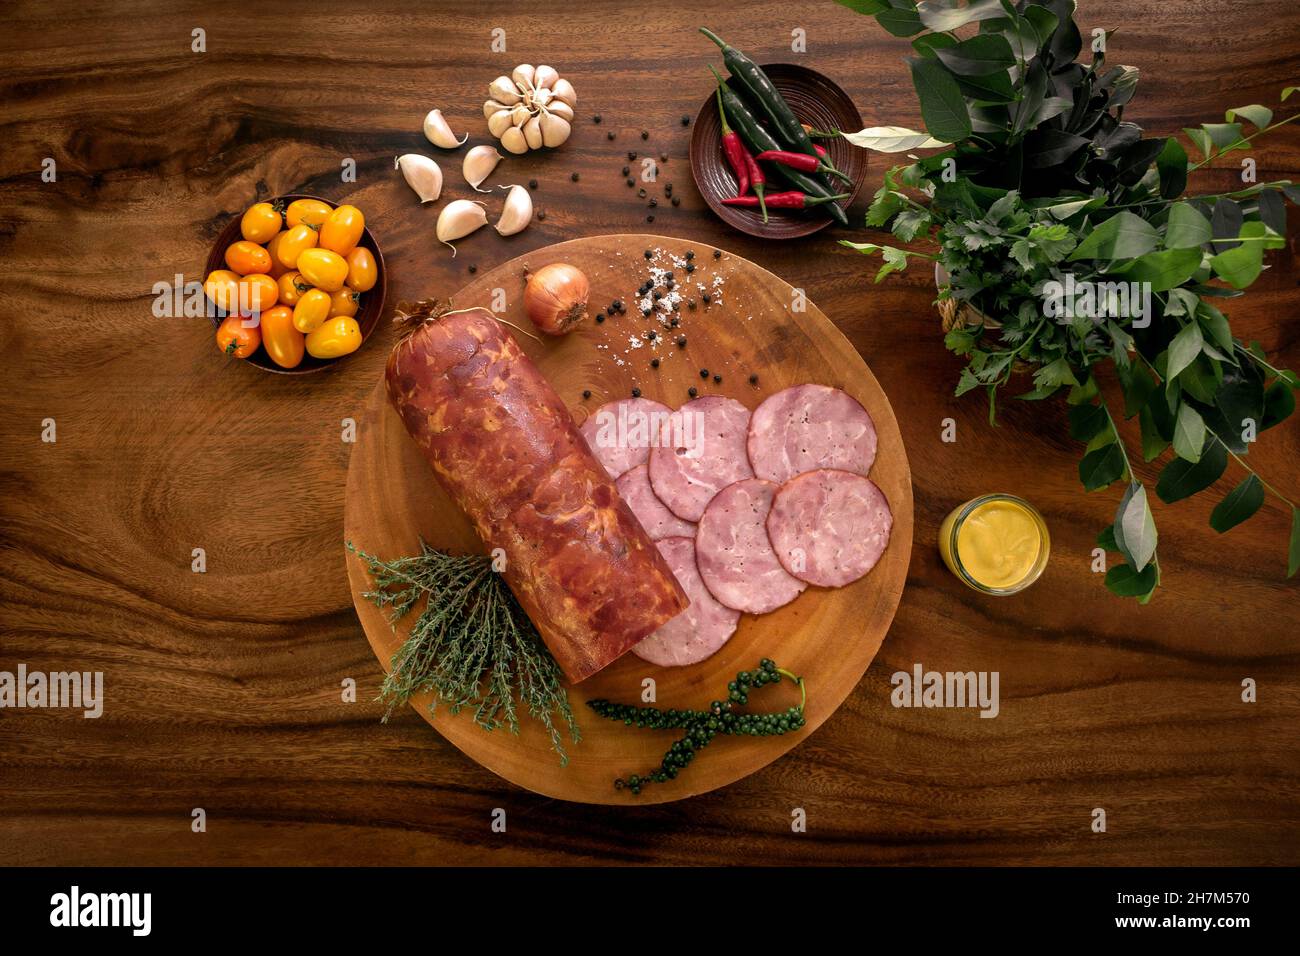 garlic ham sausage on rustic wood table with natural ingredients arrangement Stock Photo